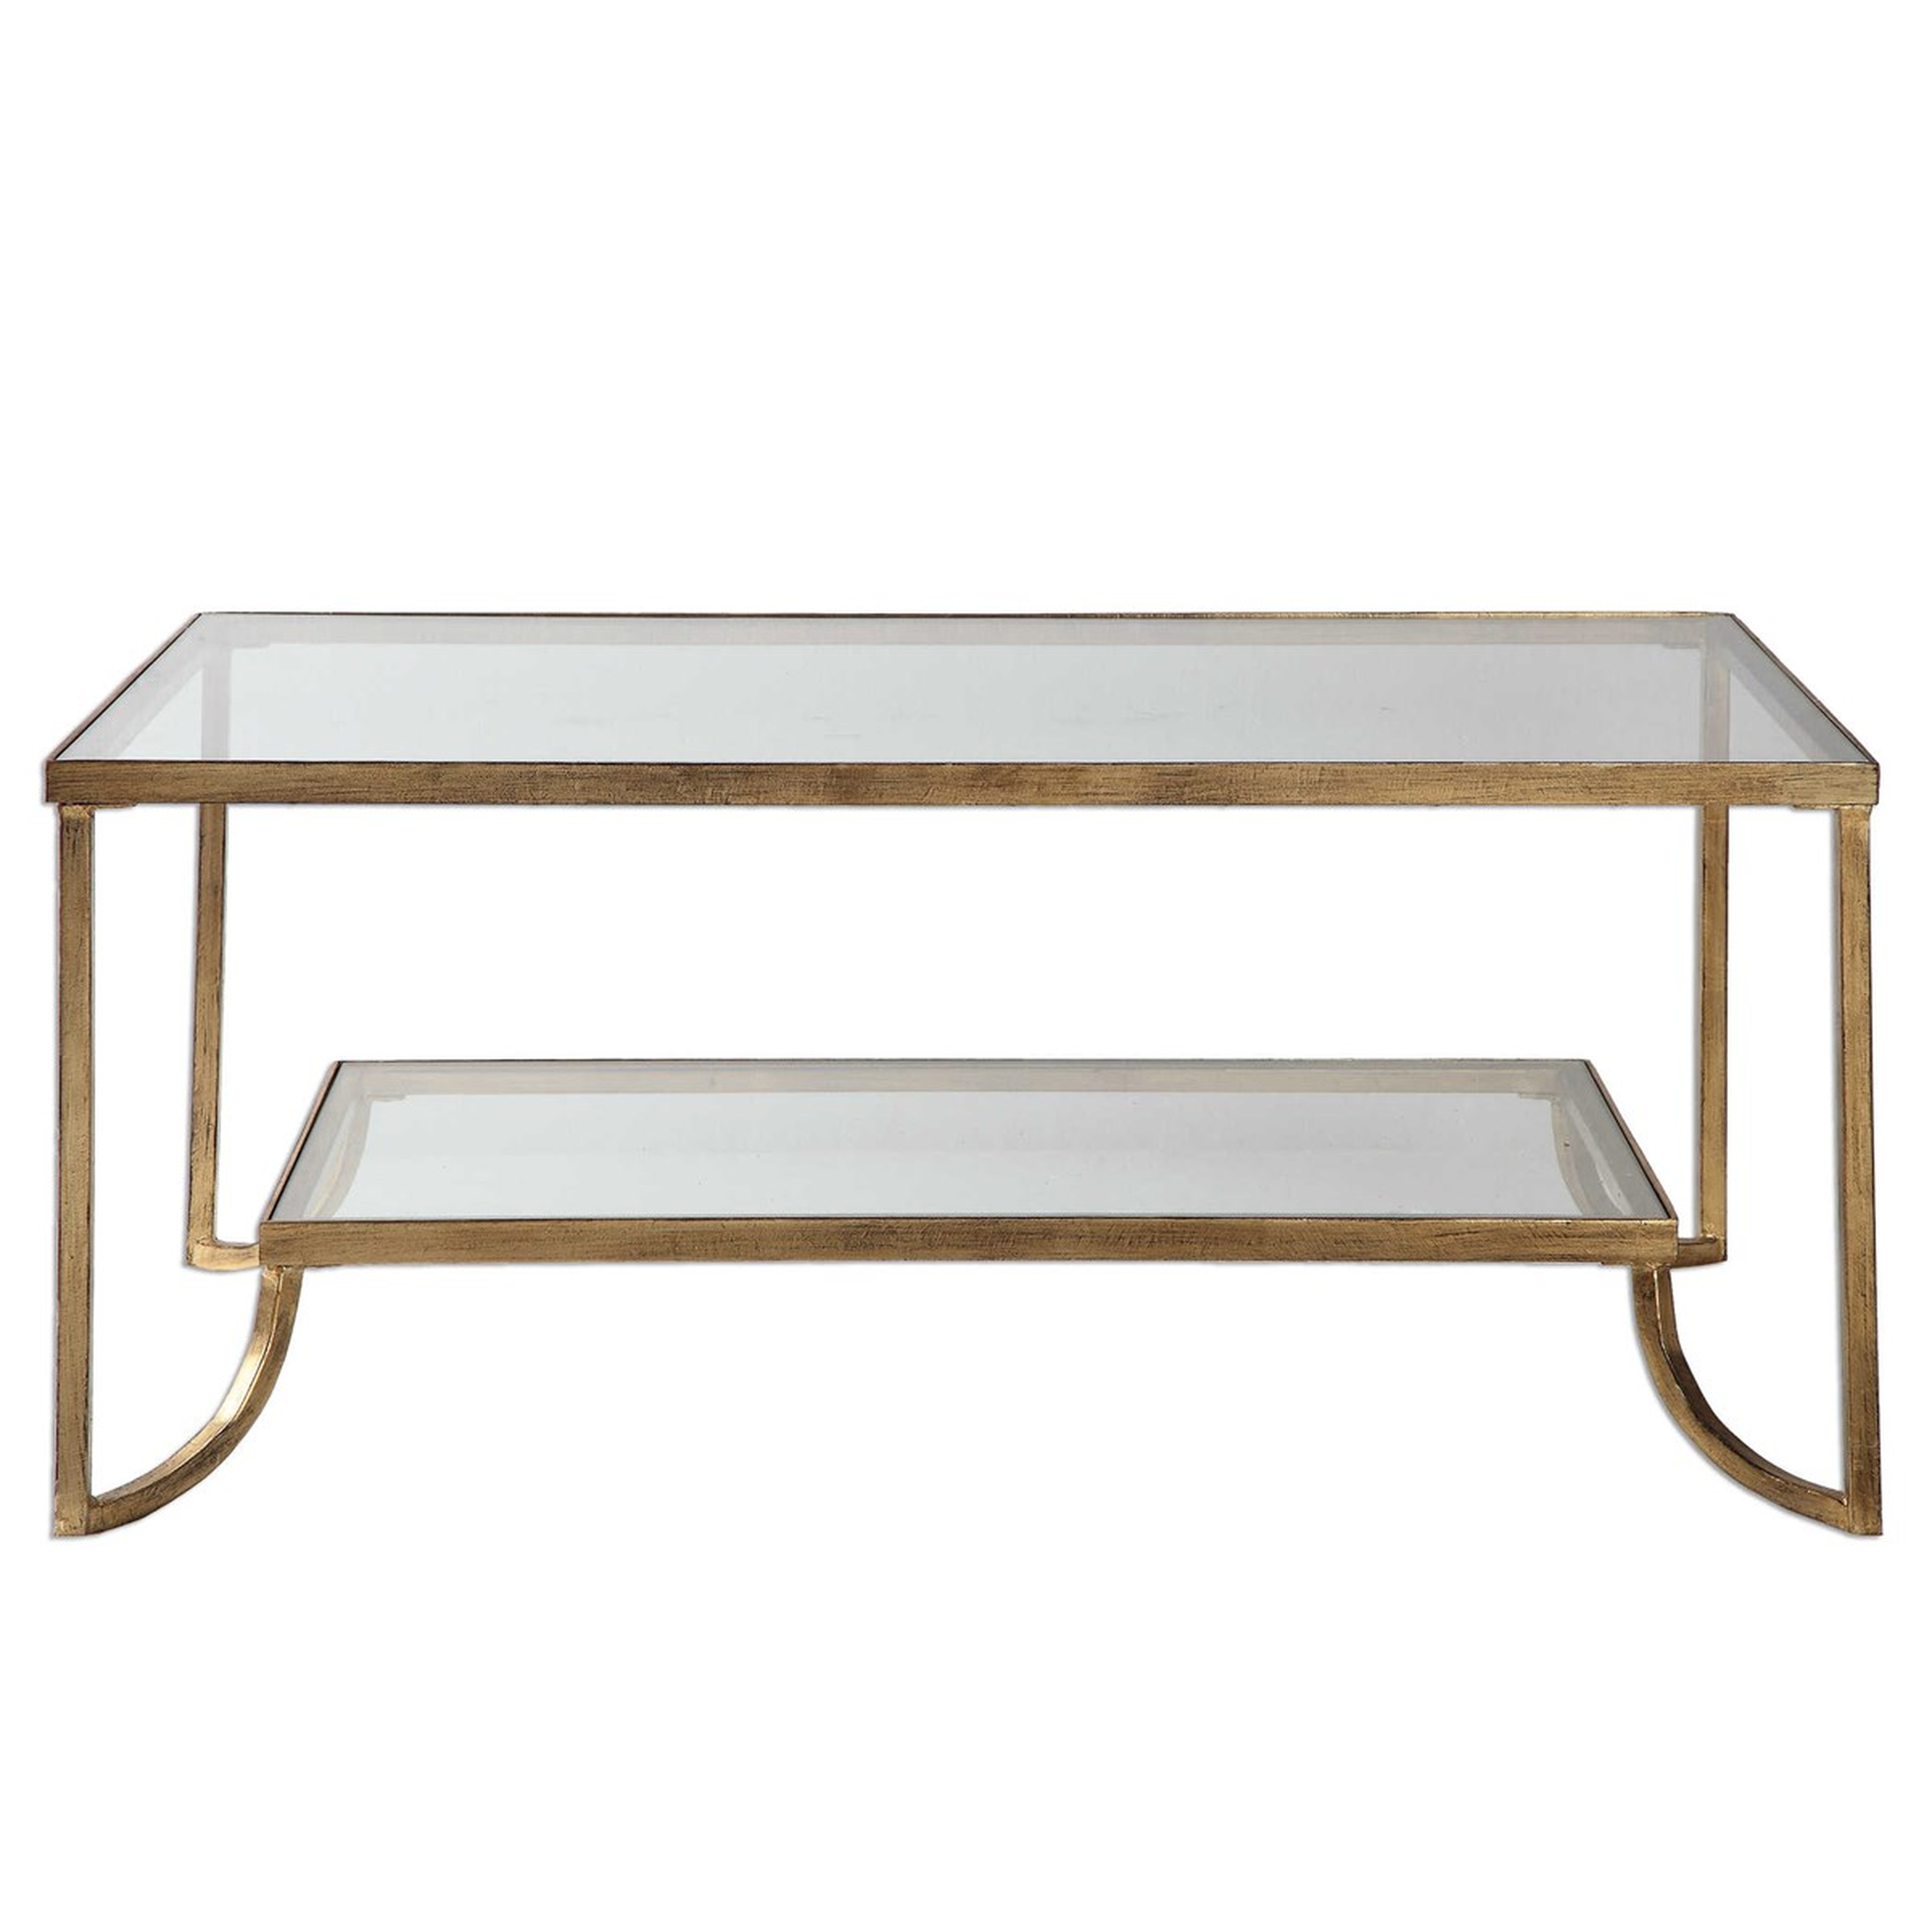 Katina Gold Leaf Coffee Table - Hudsonhill Foundry